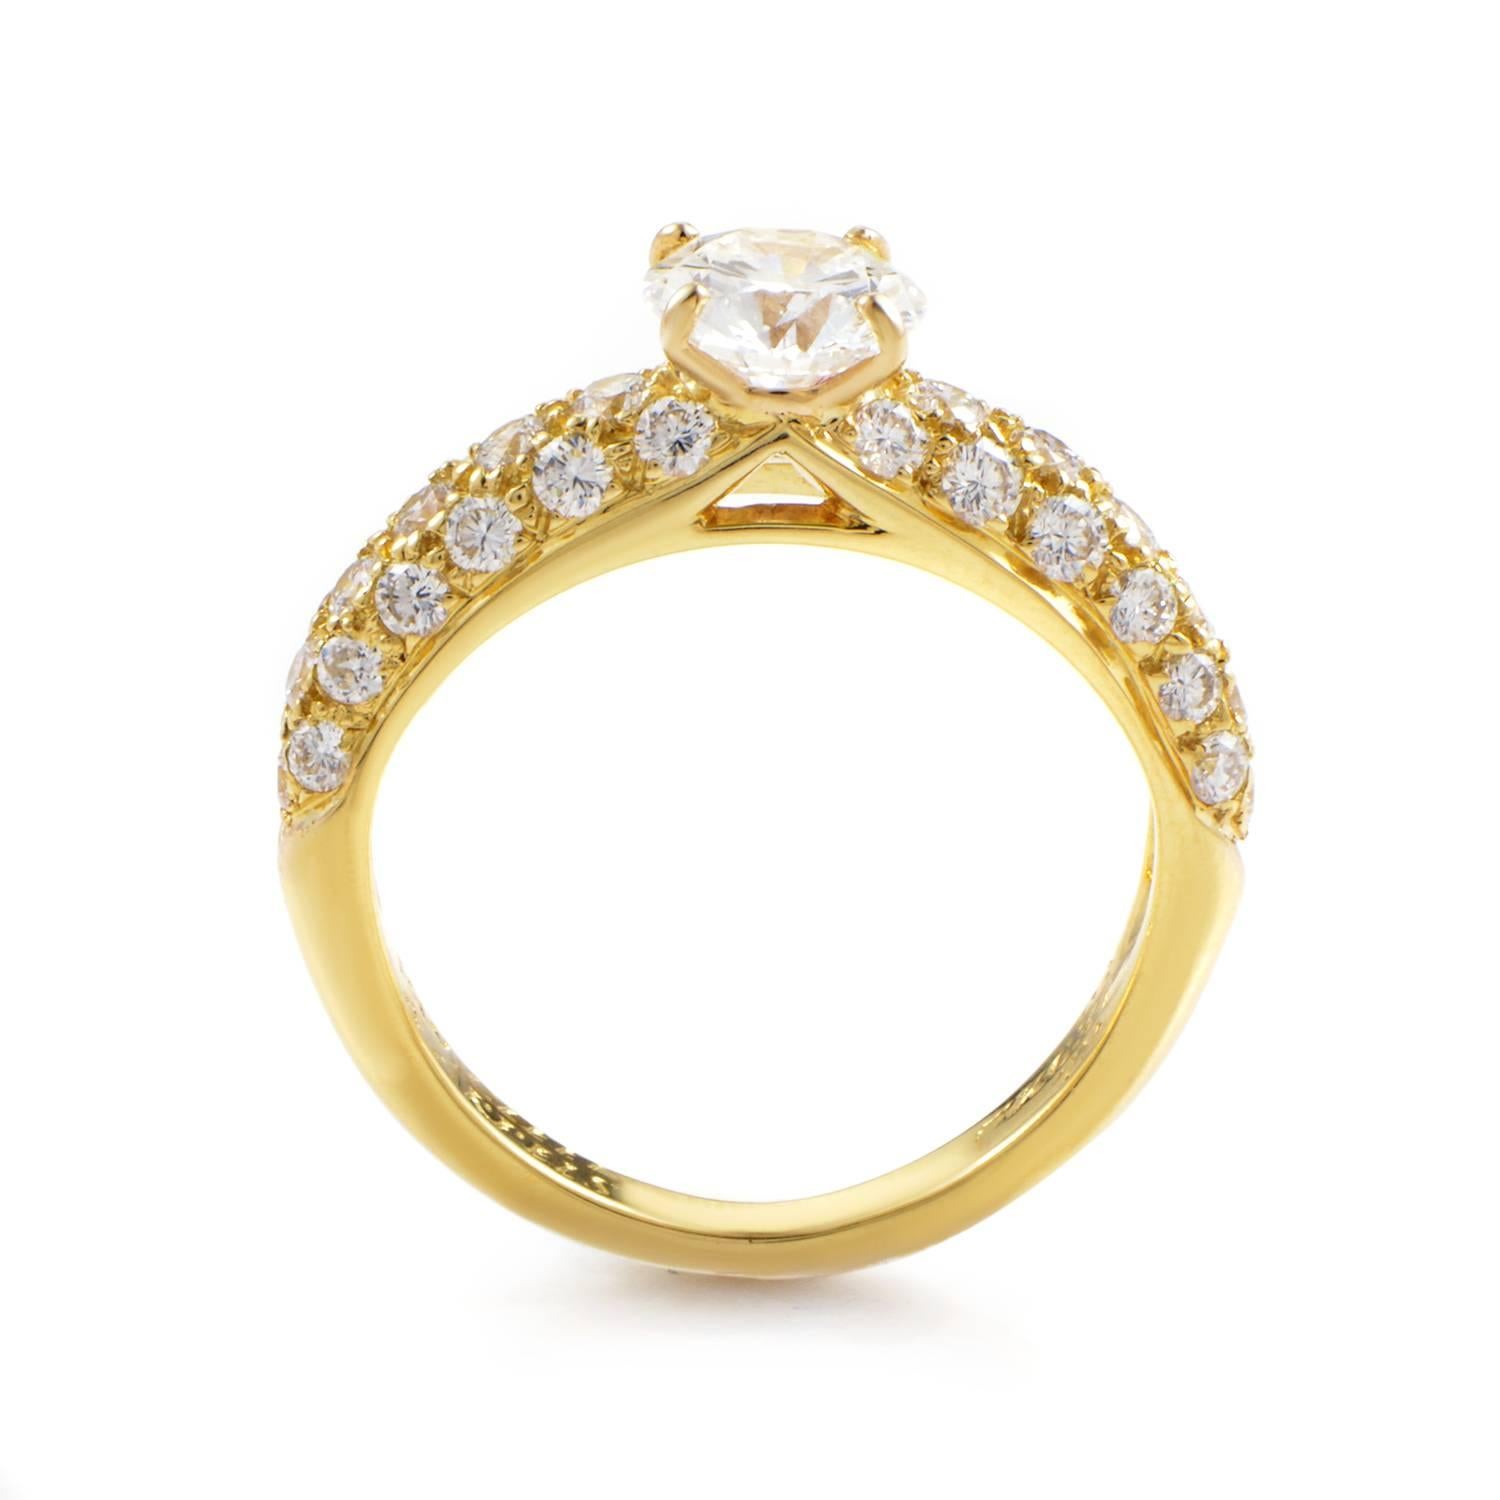 Petite perfection is delivered in style with this engagement ring from Van Cleef & Arpels. The band is a narrow stream of 18K Yellow Gold. Its ascent turns under the glamorous sparkle of 0.75ct diamonds, their threads converging at the peak where